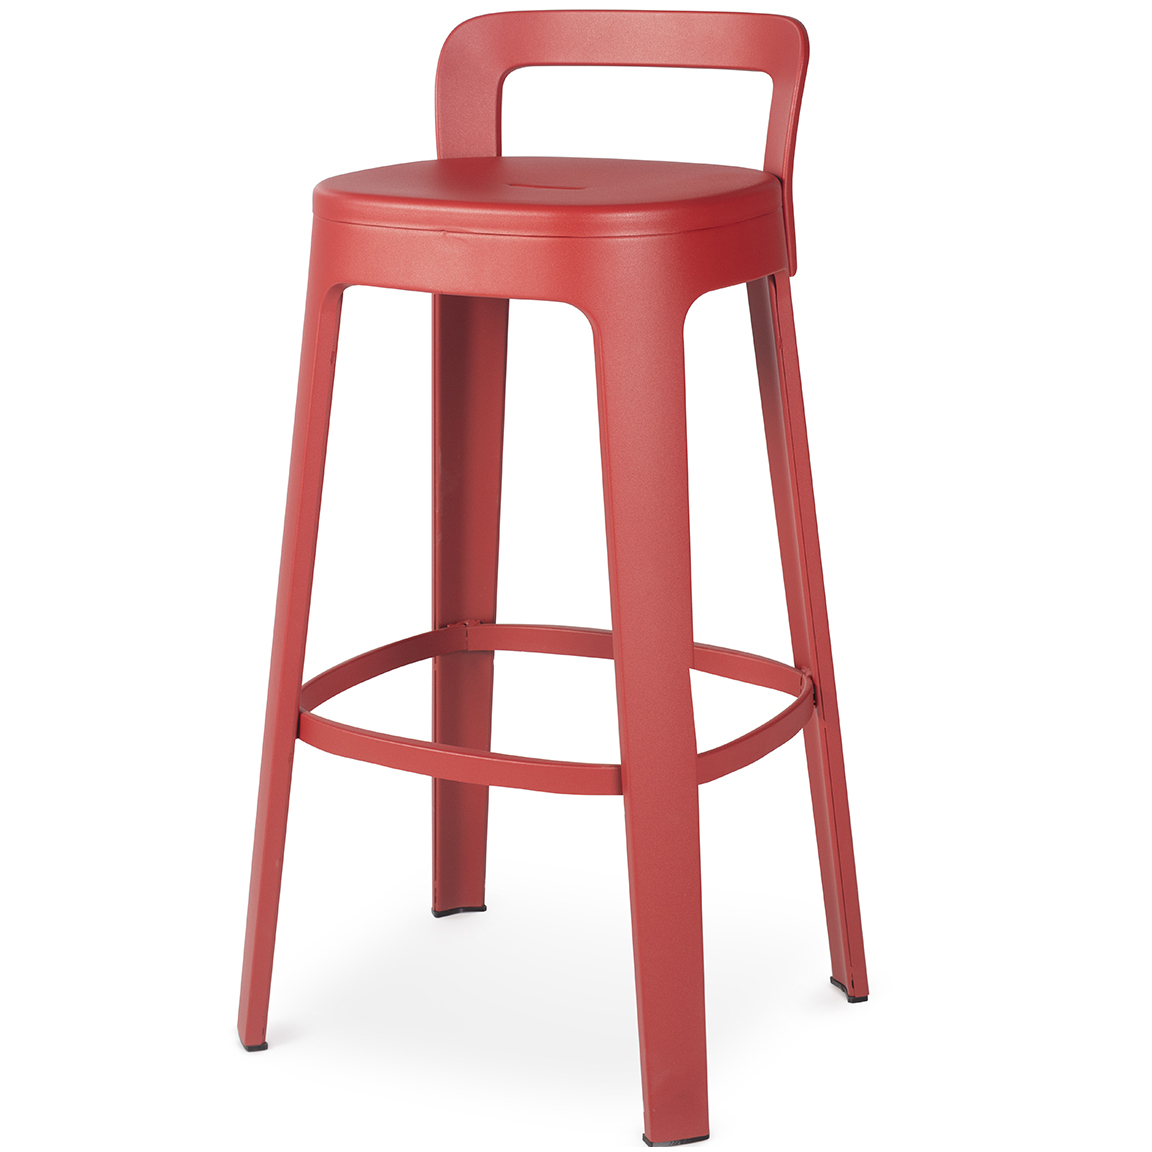 RS Barcelona Ombra Bar Stool With Back